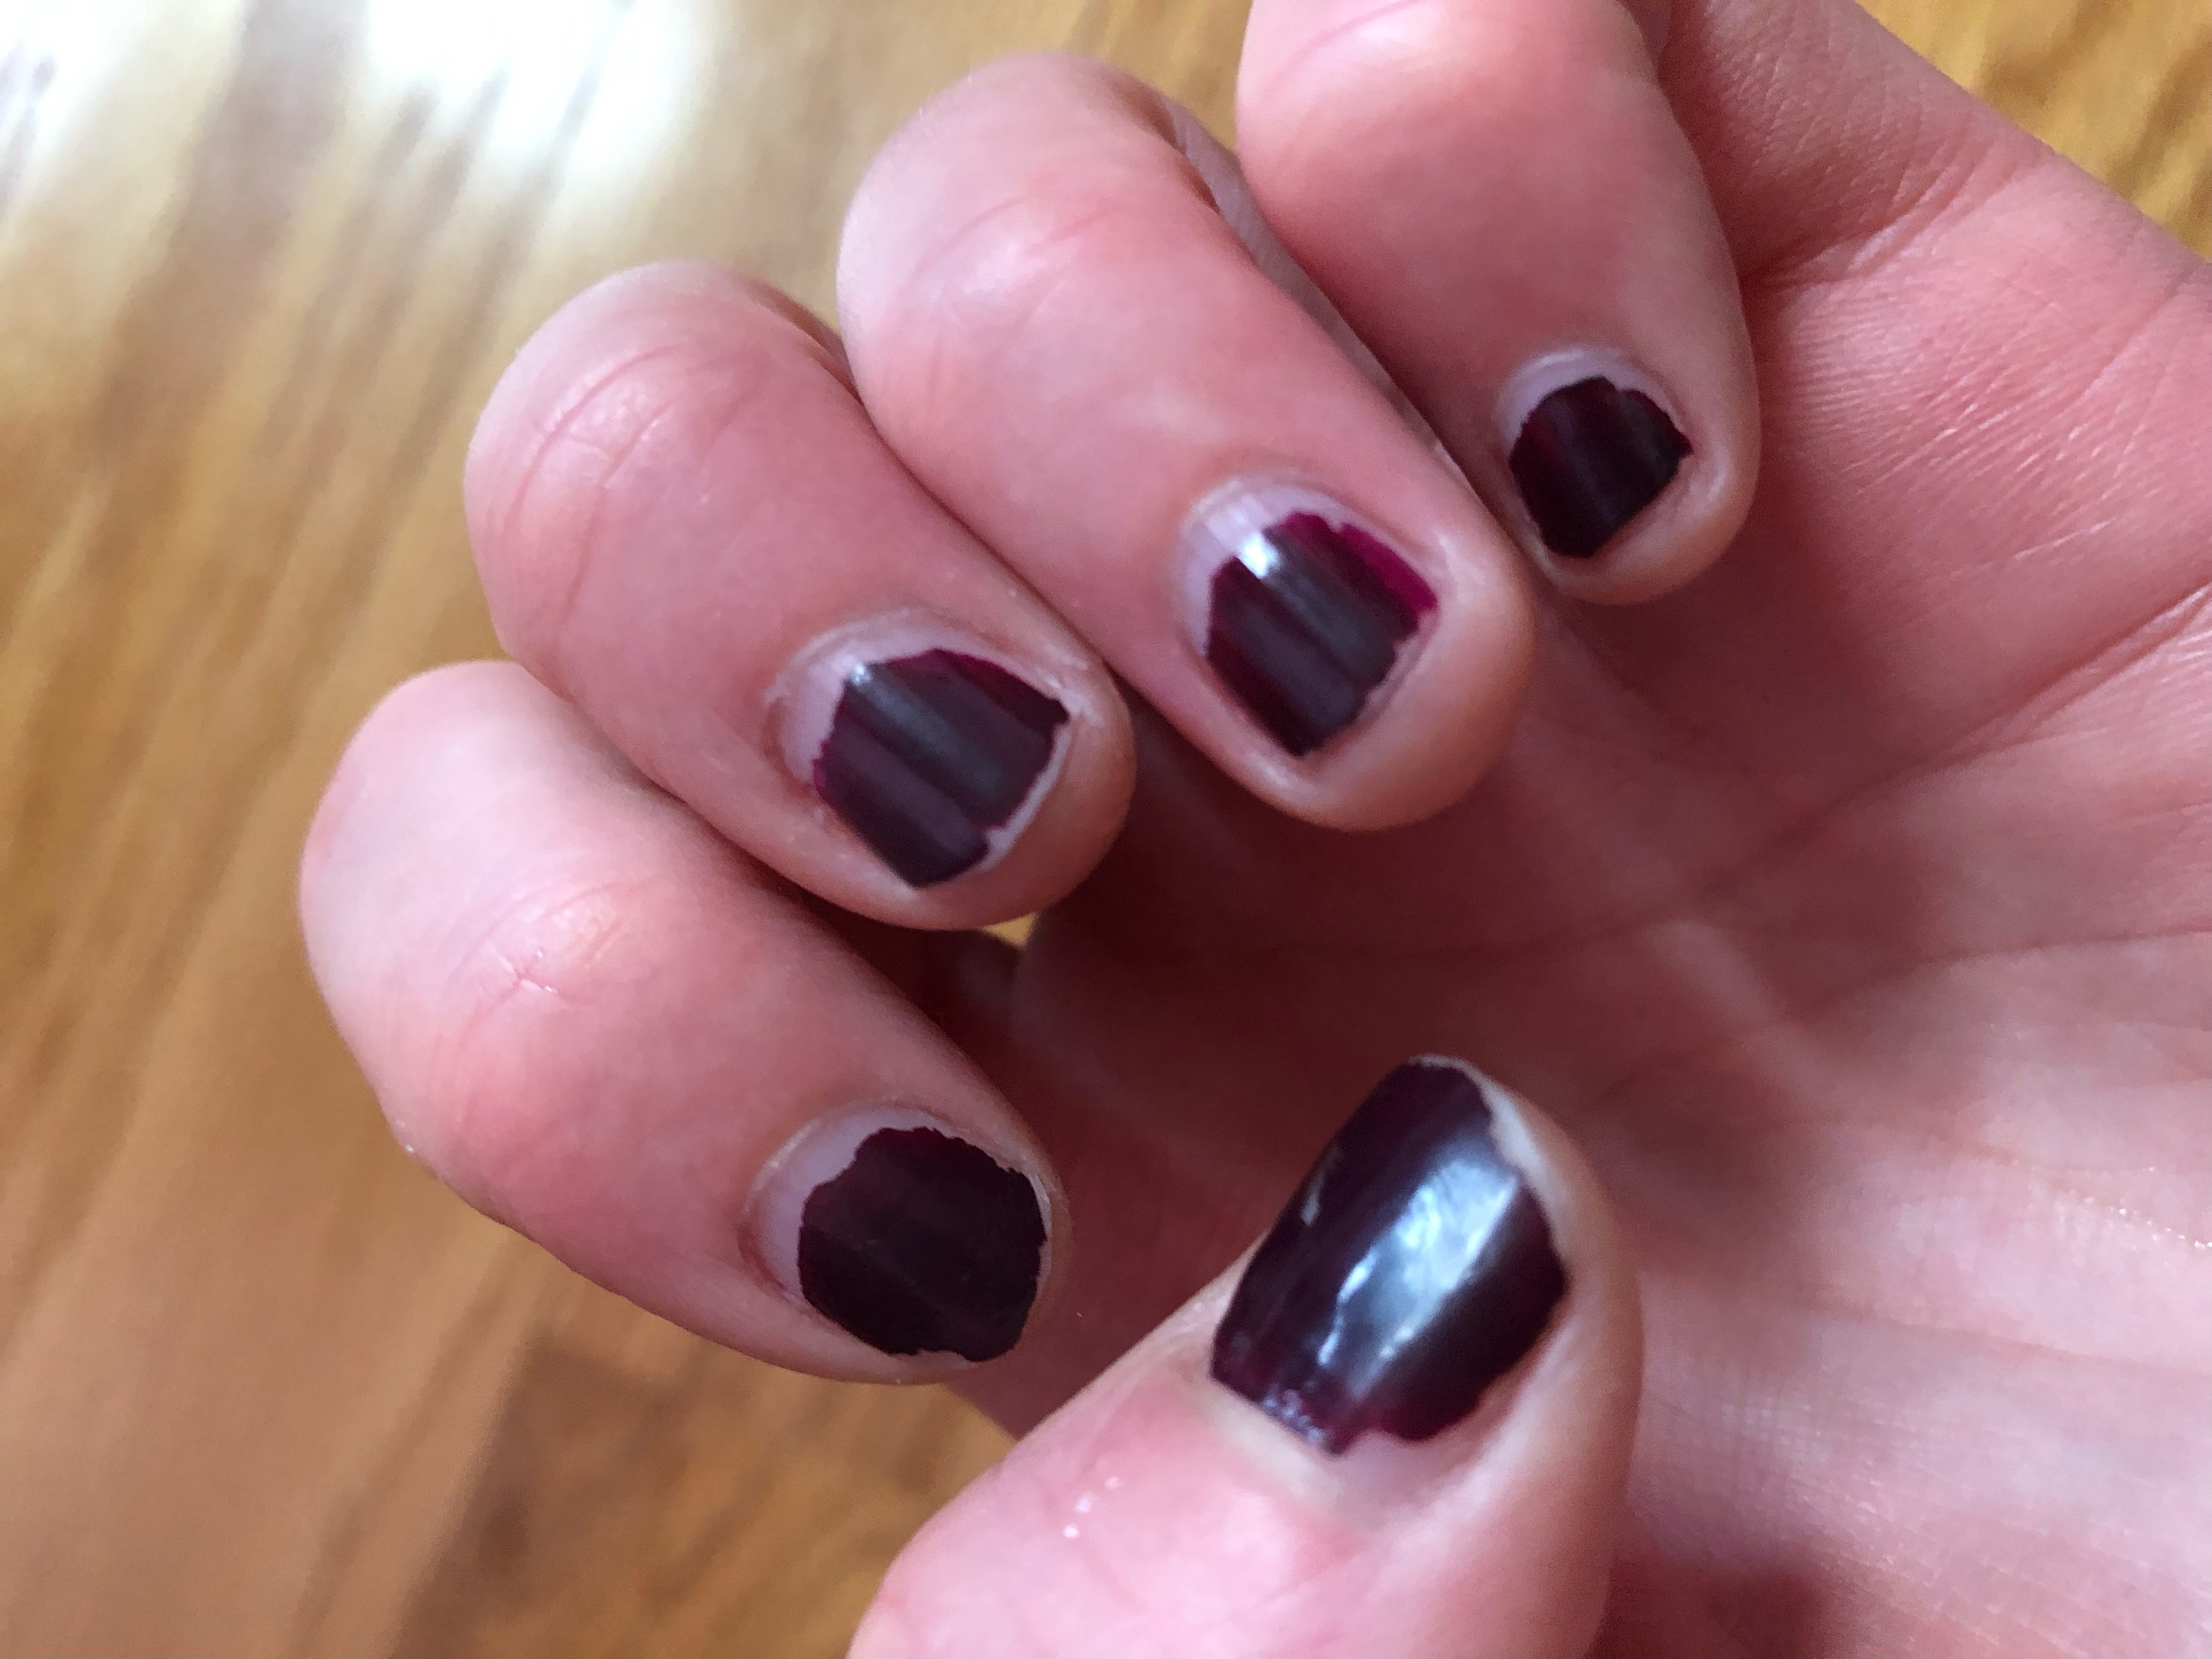 fingernails with grown-out nail polish